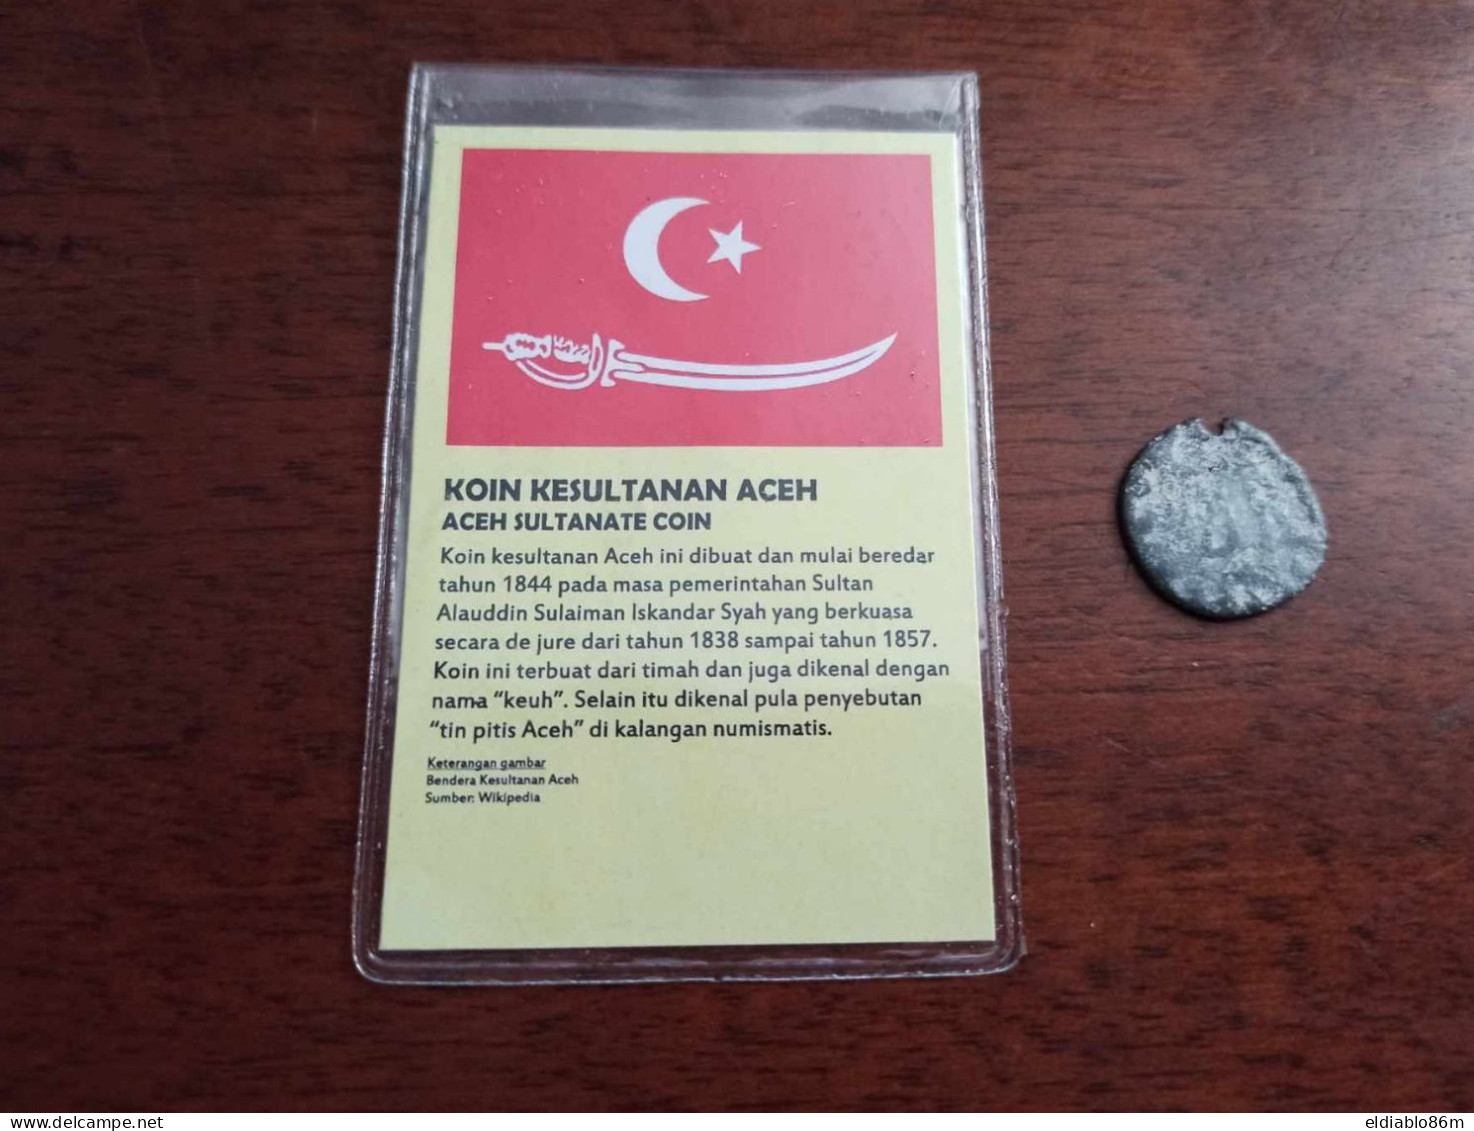 INDONESIA - ACEH SULTANATE COIN - 19TH CENTURY - ONE COIN ON SALE (FRONT BACK PICTURE) - Indonesia